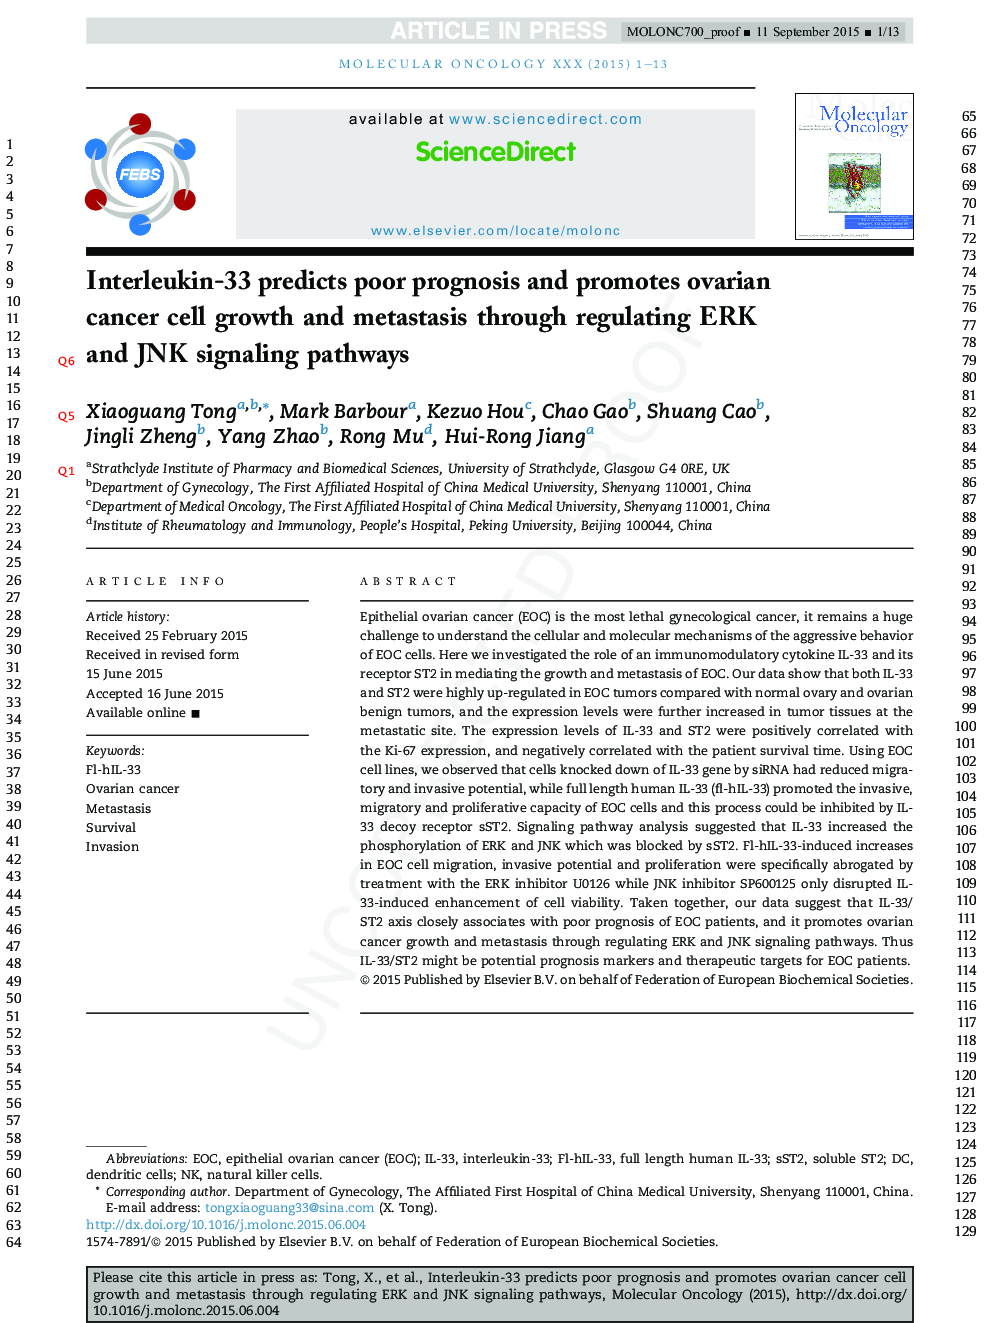 Interleukin-33 predicts poor prognosis and promotes ovarian cancer cell growth and metastasis through regulating ERK and JNK signaling pathways